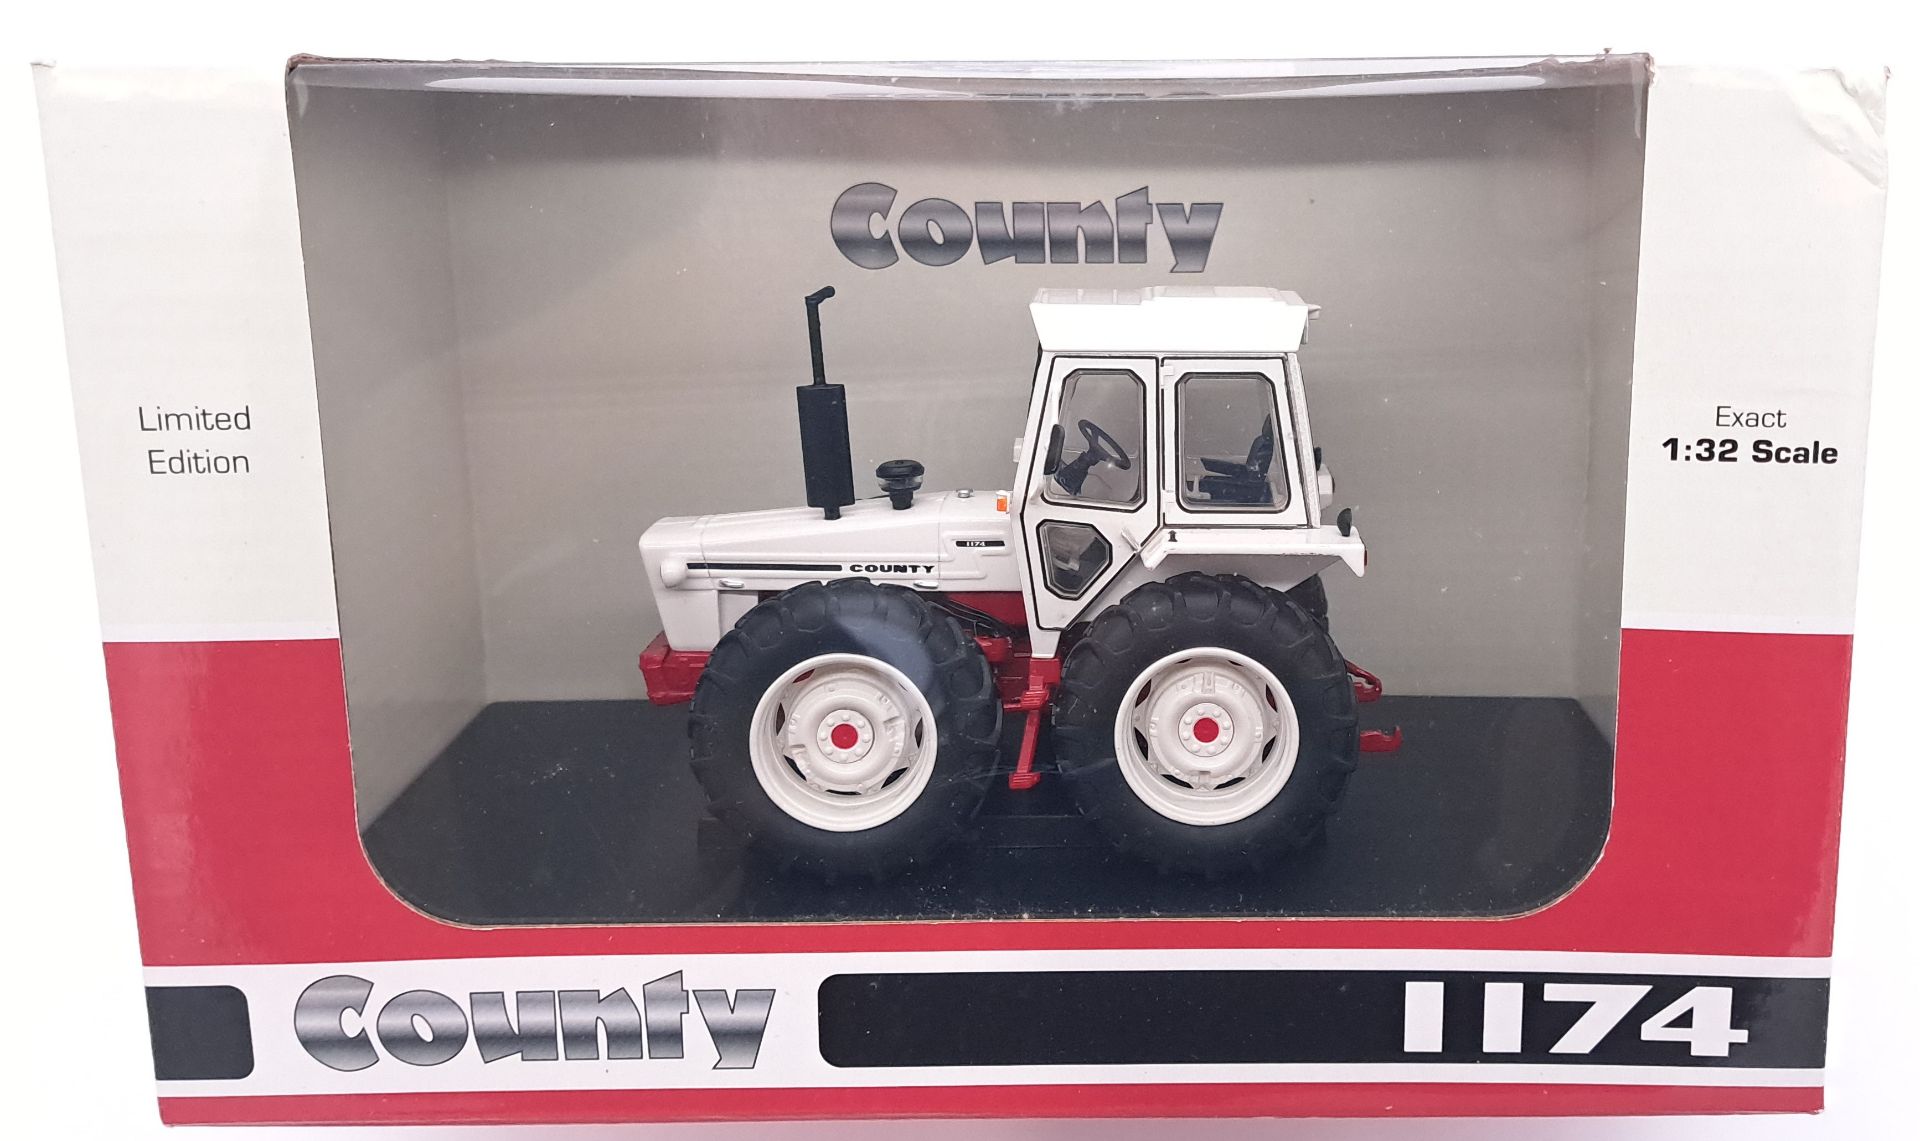 Universal Hobbies (County Series) boxed 1:32 scale Tractor group - Image 2 of 5